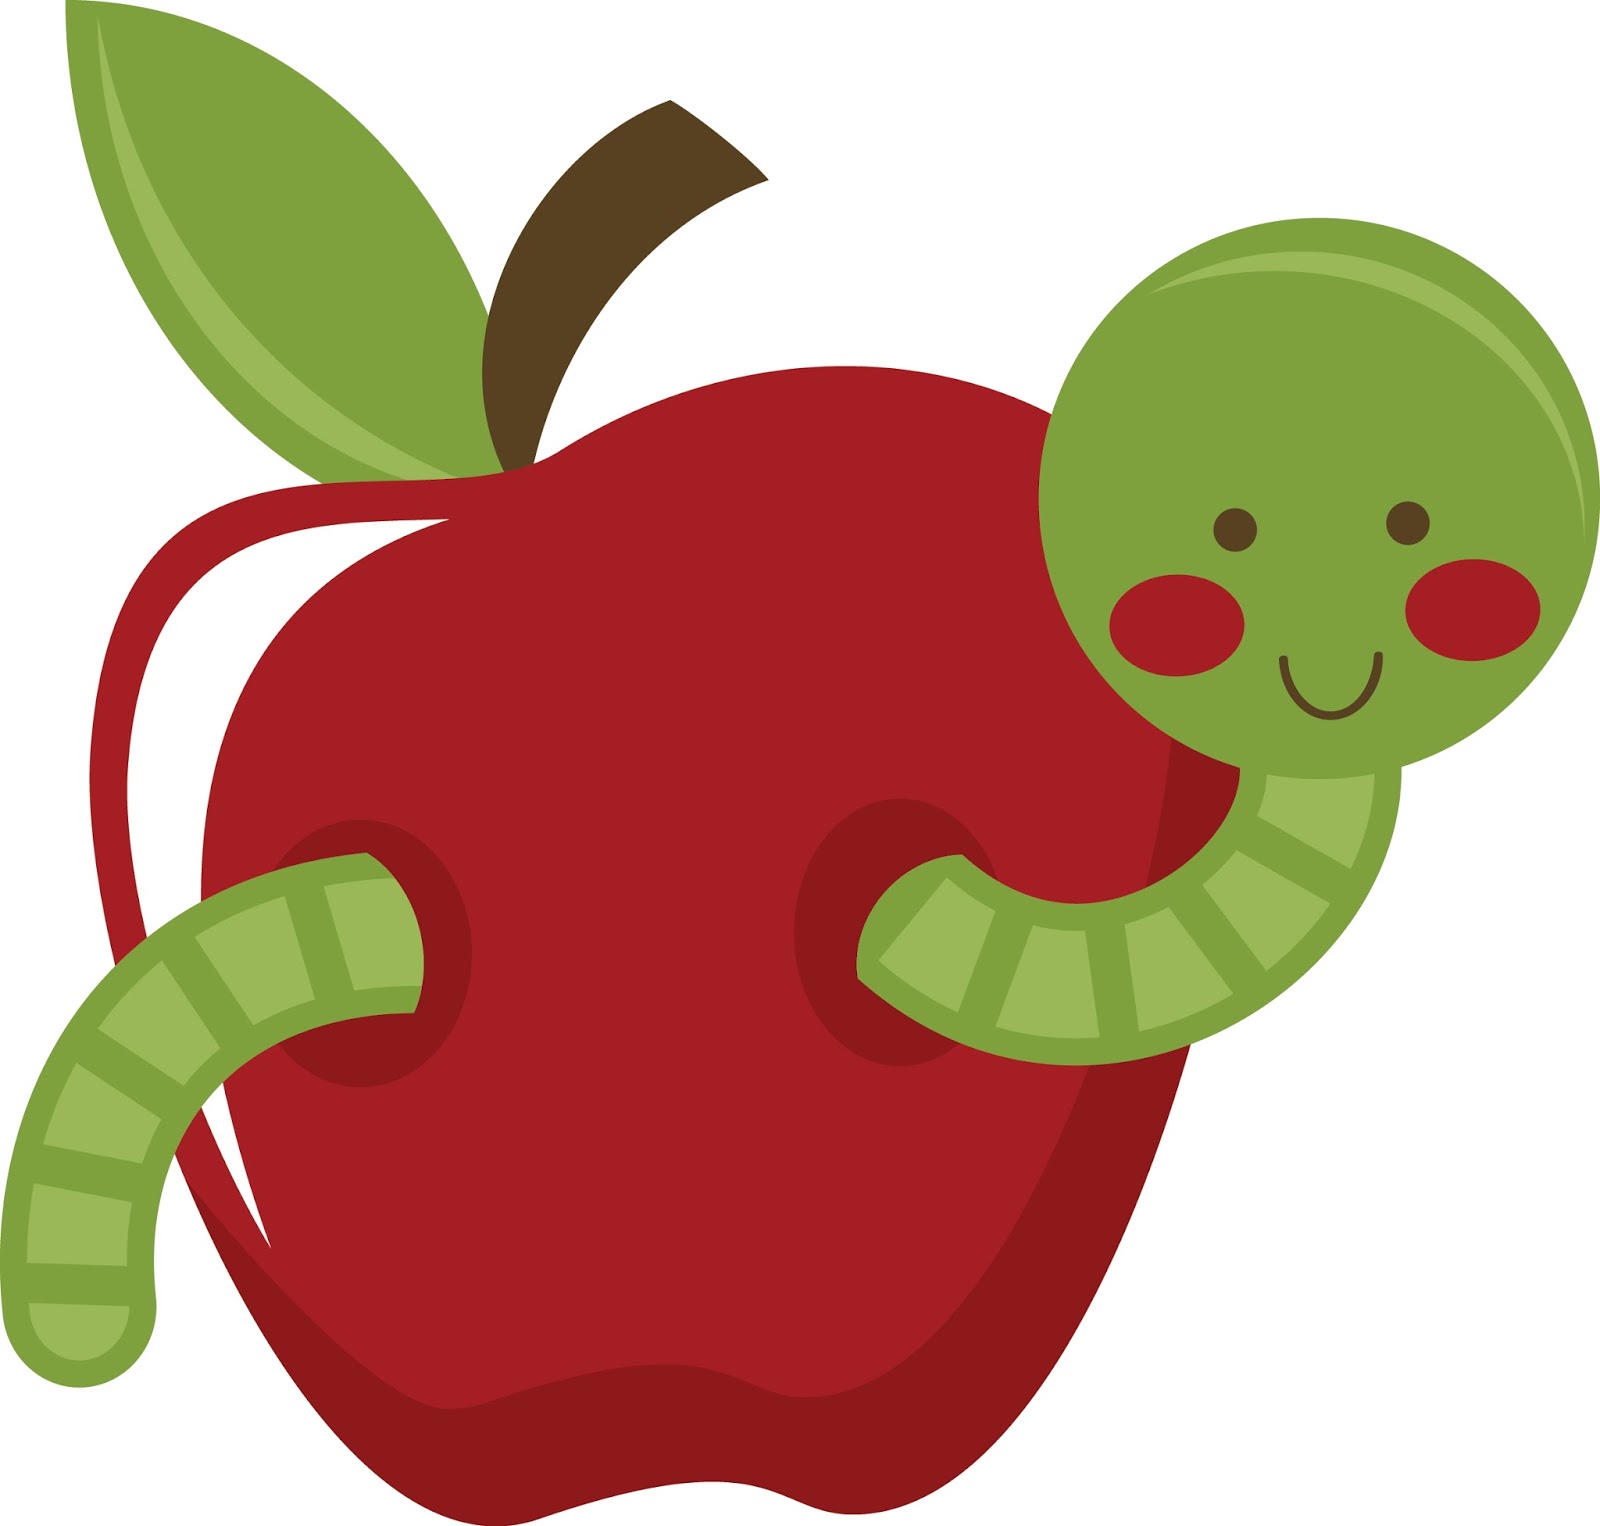 Apple Worm - Free online games at Agamecom